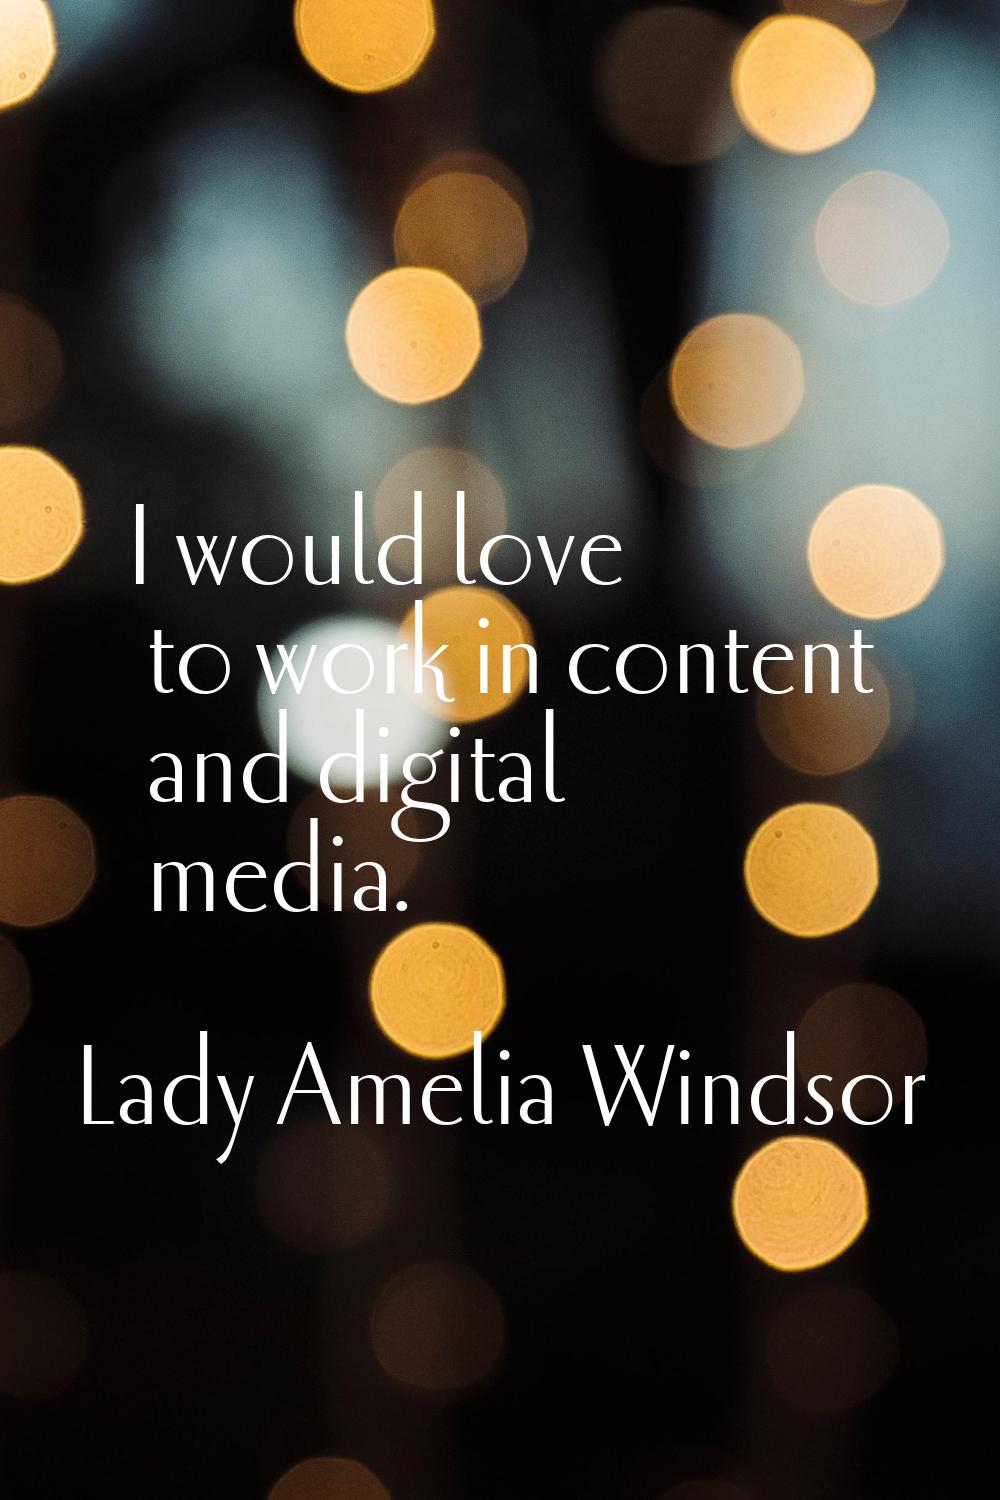 I would love to work in content and digital media.